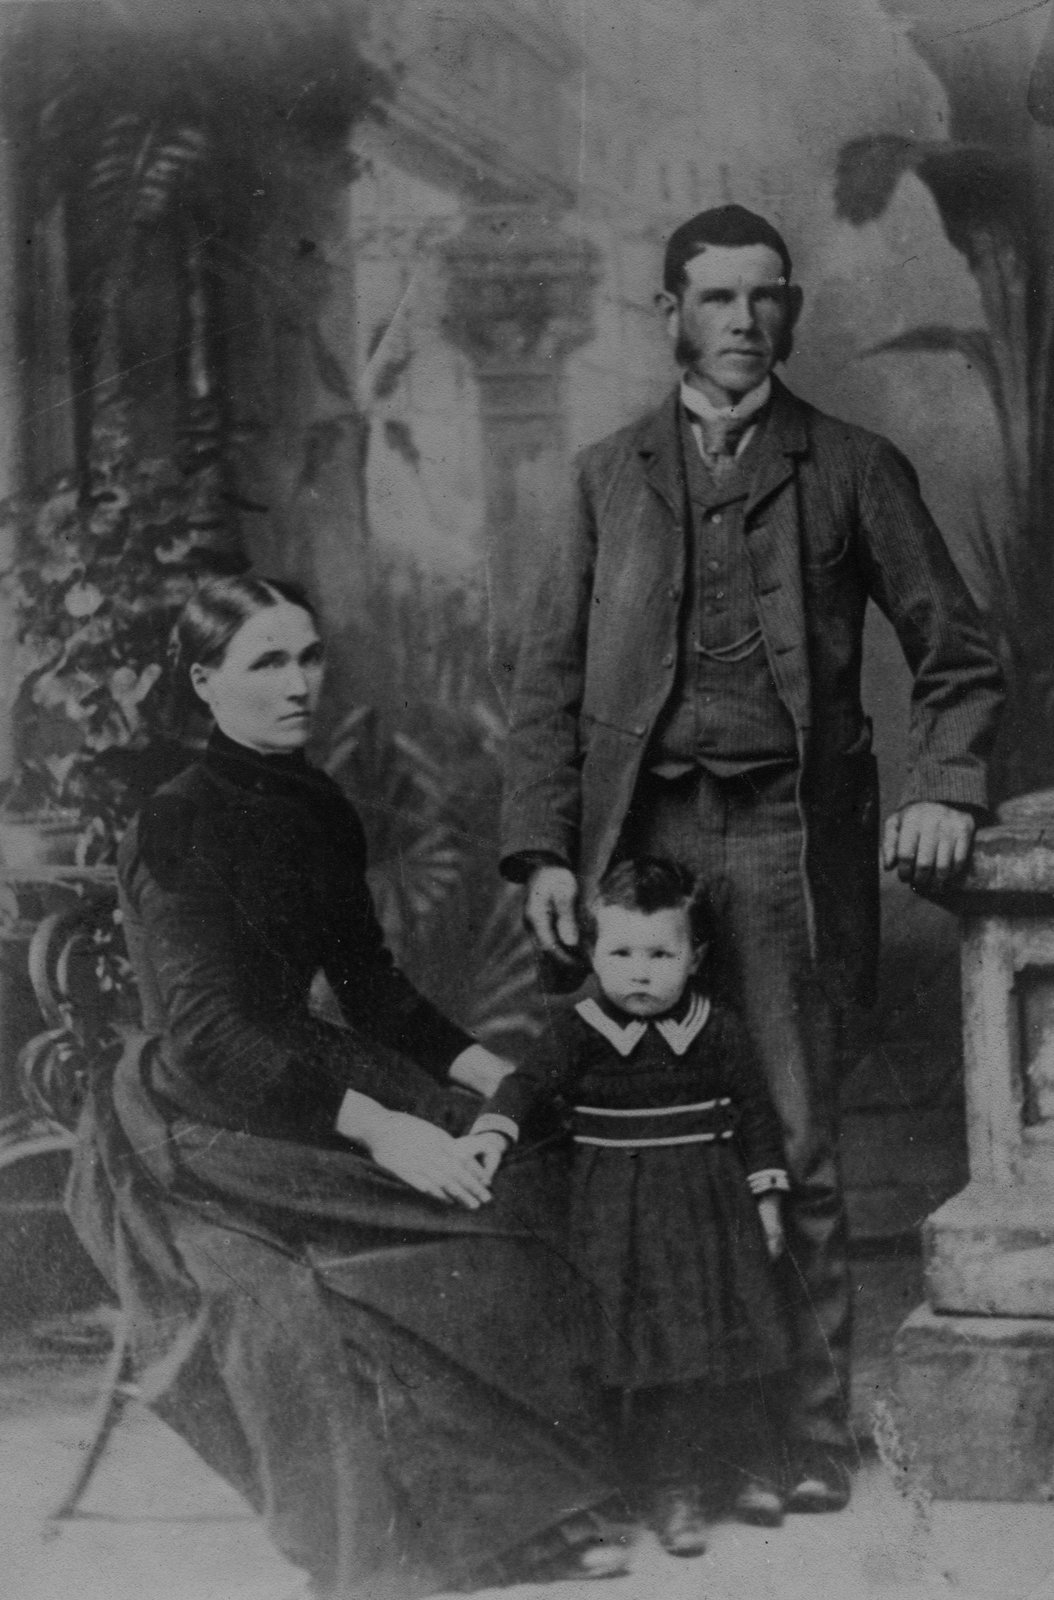 James McCoy (great grandfather of the album owner), pictured with his wife (nee O’Hanlon) & their infant son John McCoy. John McCoy was born in 1889, dating this photograph to 1890 or ’91.